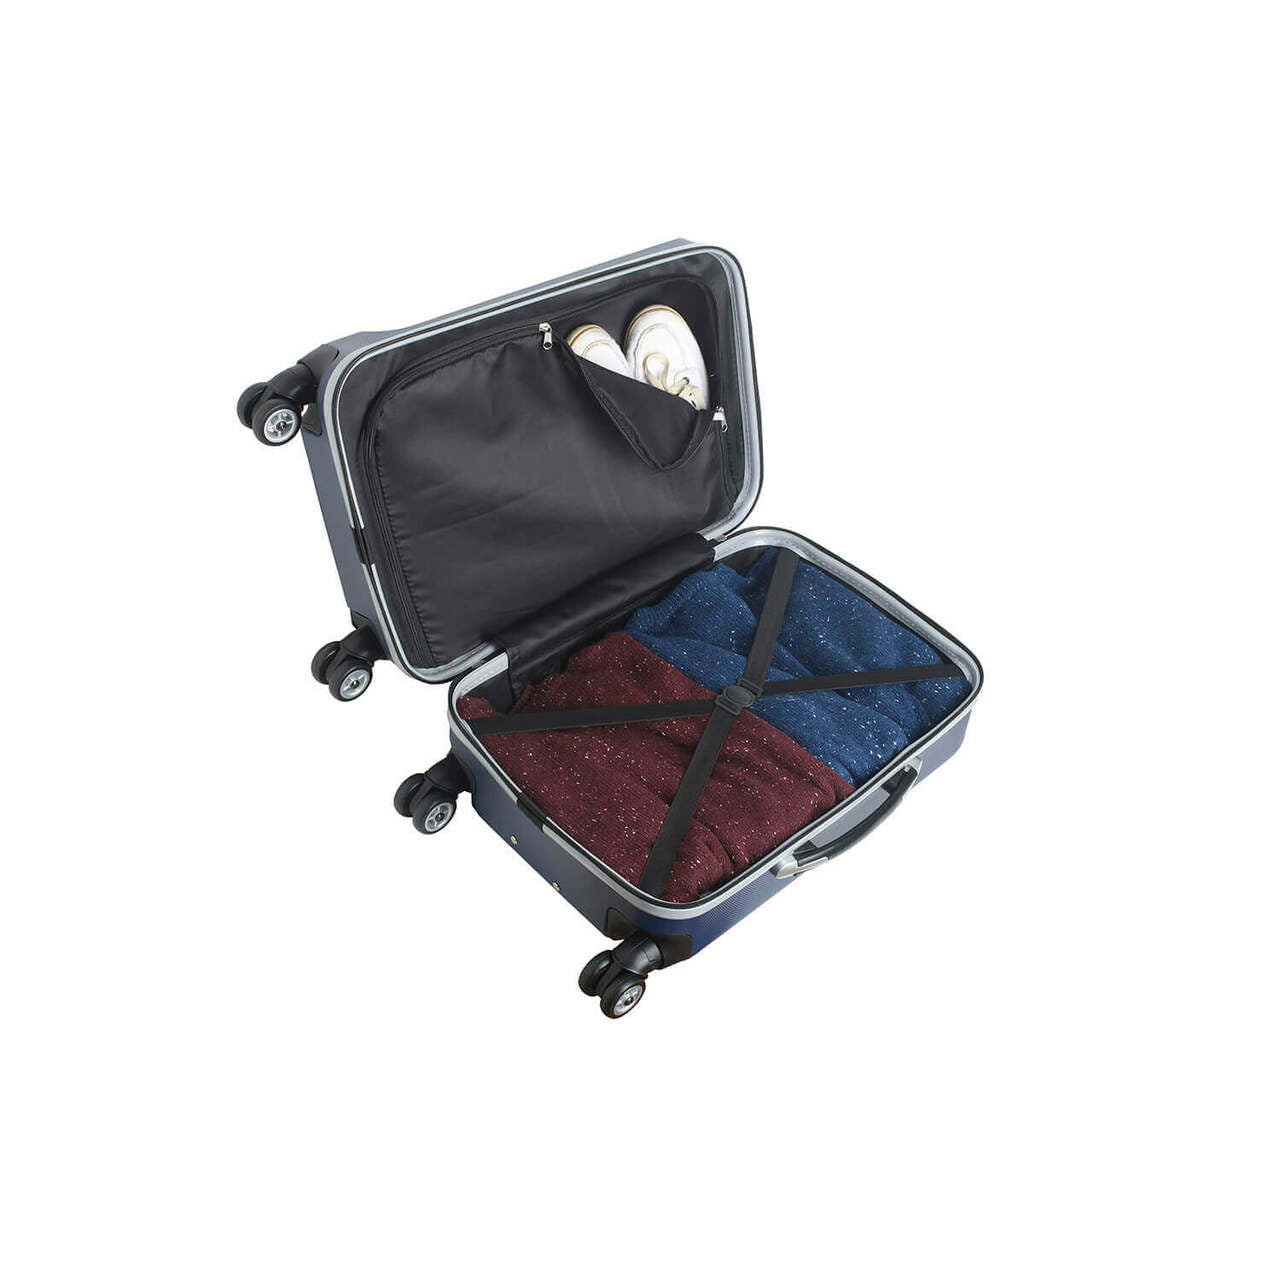 Edmonton Oilers 20" Navy Domestic Carry-on Spinner